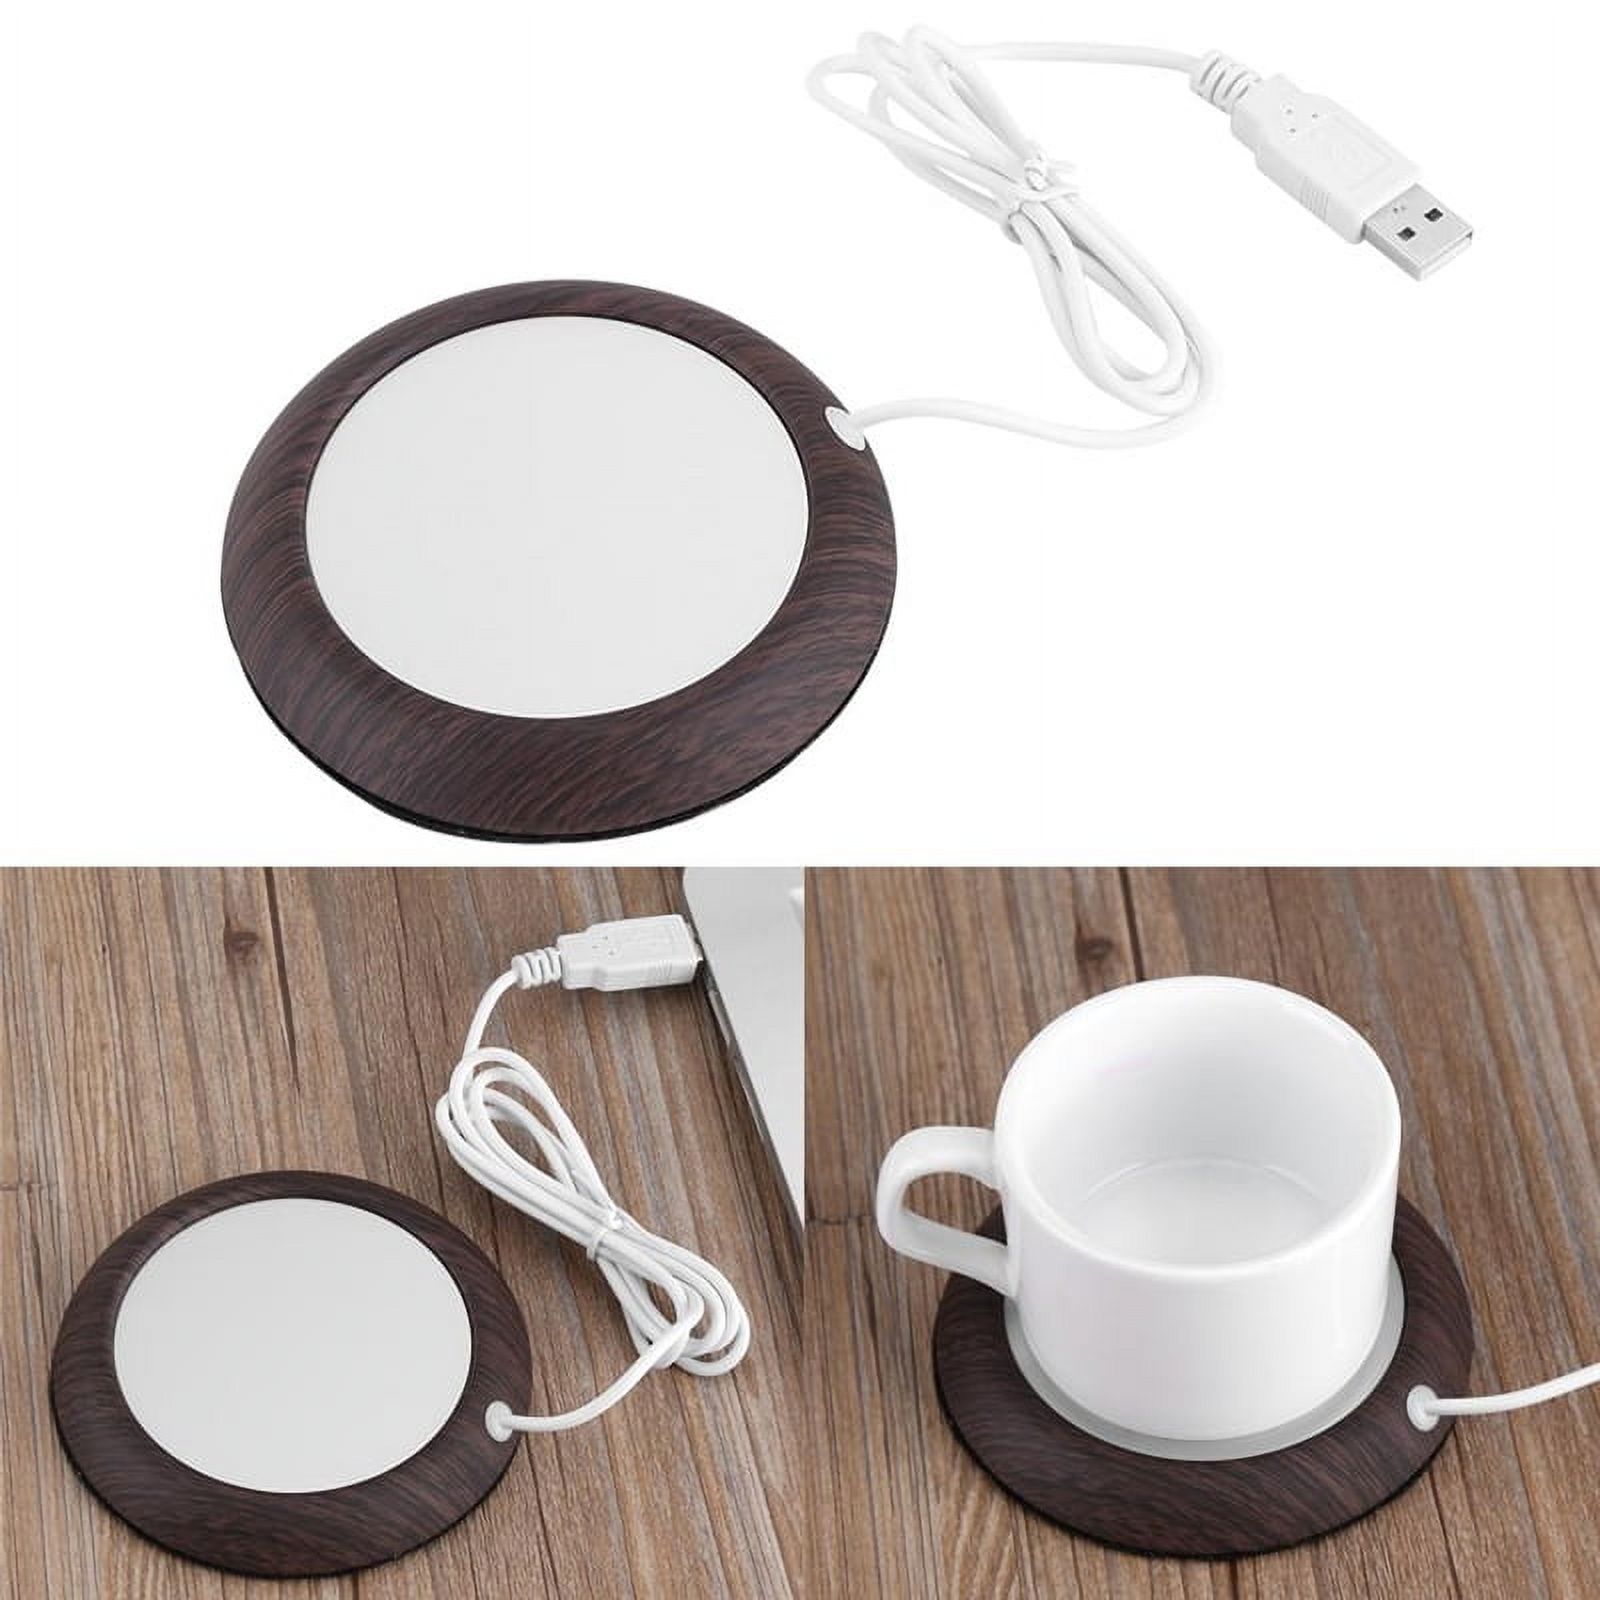 Cup Heater, Portable Cup Mug Warmer Heating Pad, Wooden Grain Cup Water/Beverage/Coffee/Milk Electric Warmer Pad - Fit for Most Stainless Steel Cup, Ceramic Cup, Glass Cup, Feeding Bottle - image 1 of 8